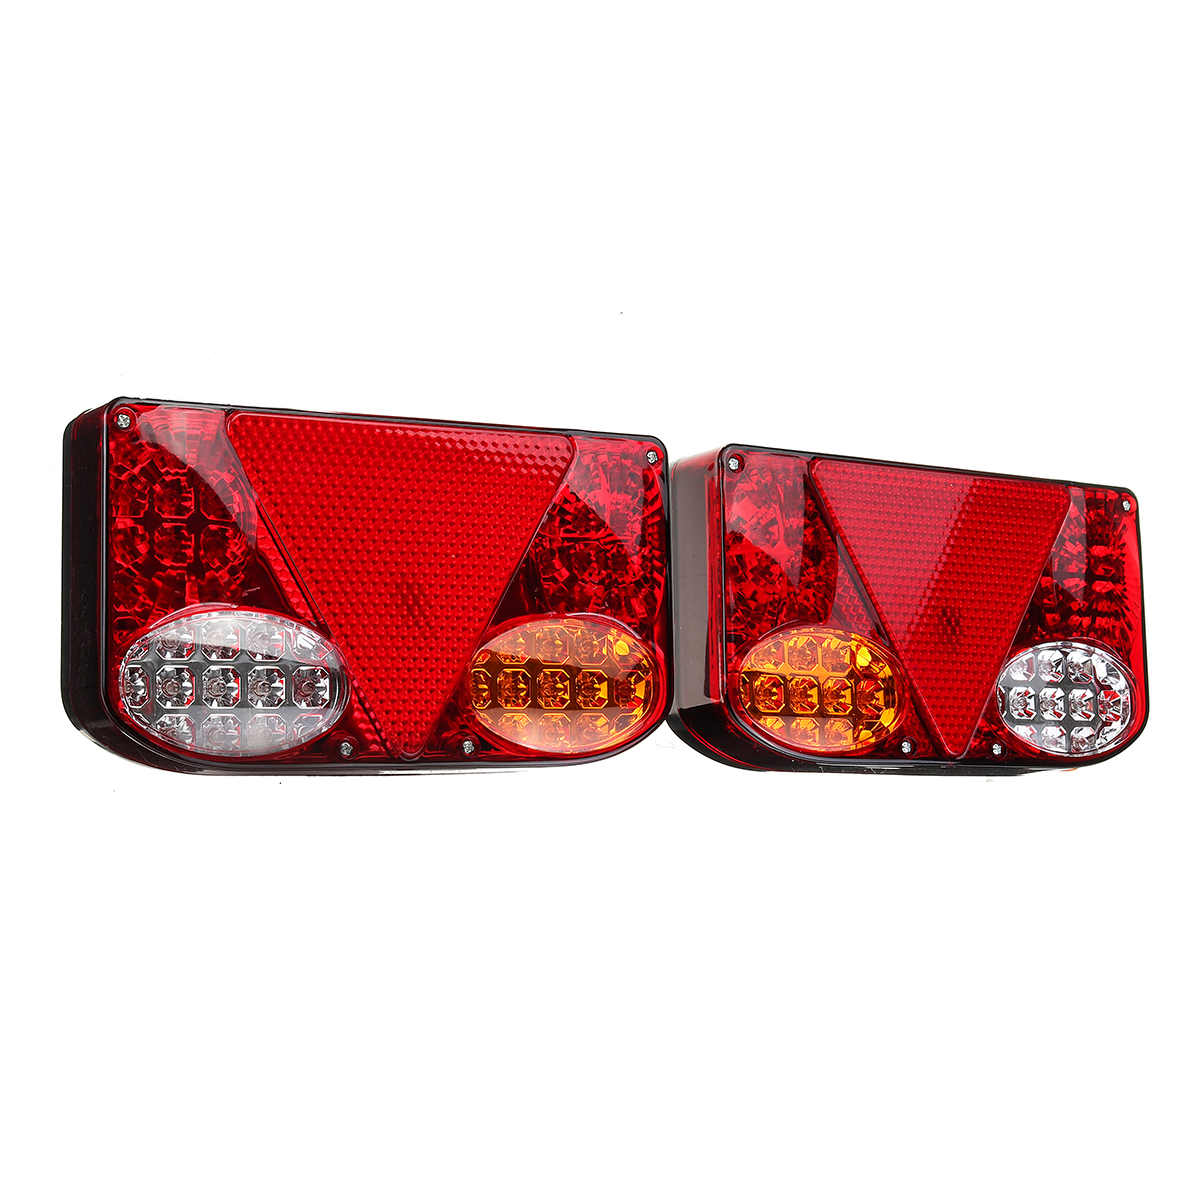 Pair 12V LED Rear Tail Lights Turn Signal Indicator Lamp for Marine Car Trailer Truck Lorry Pick-Up